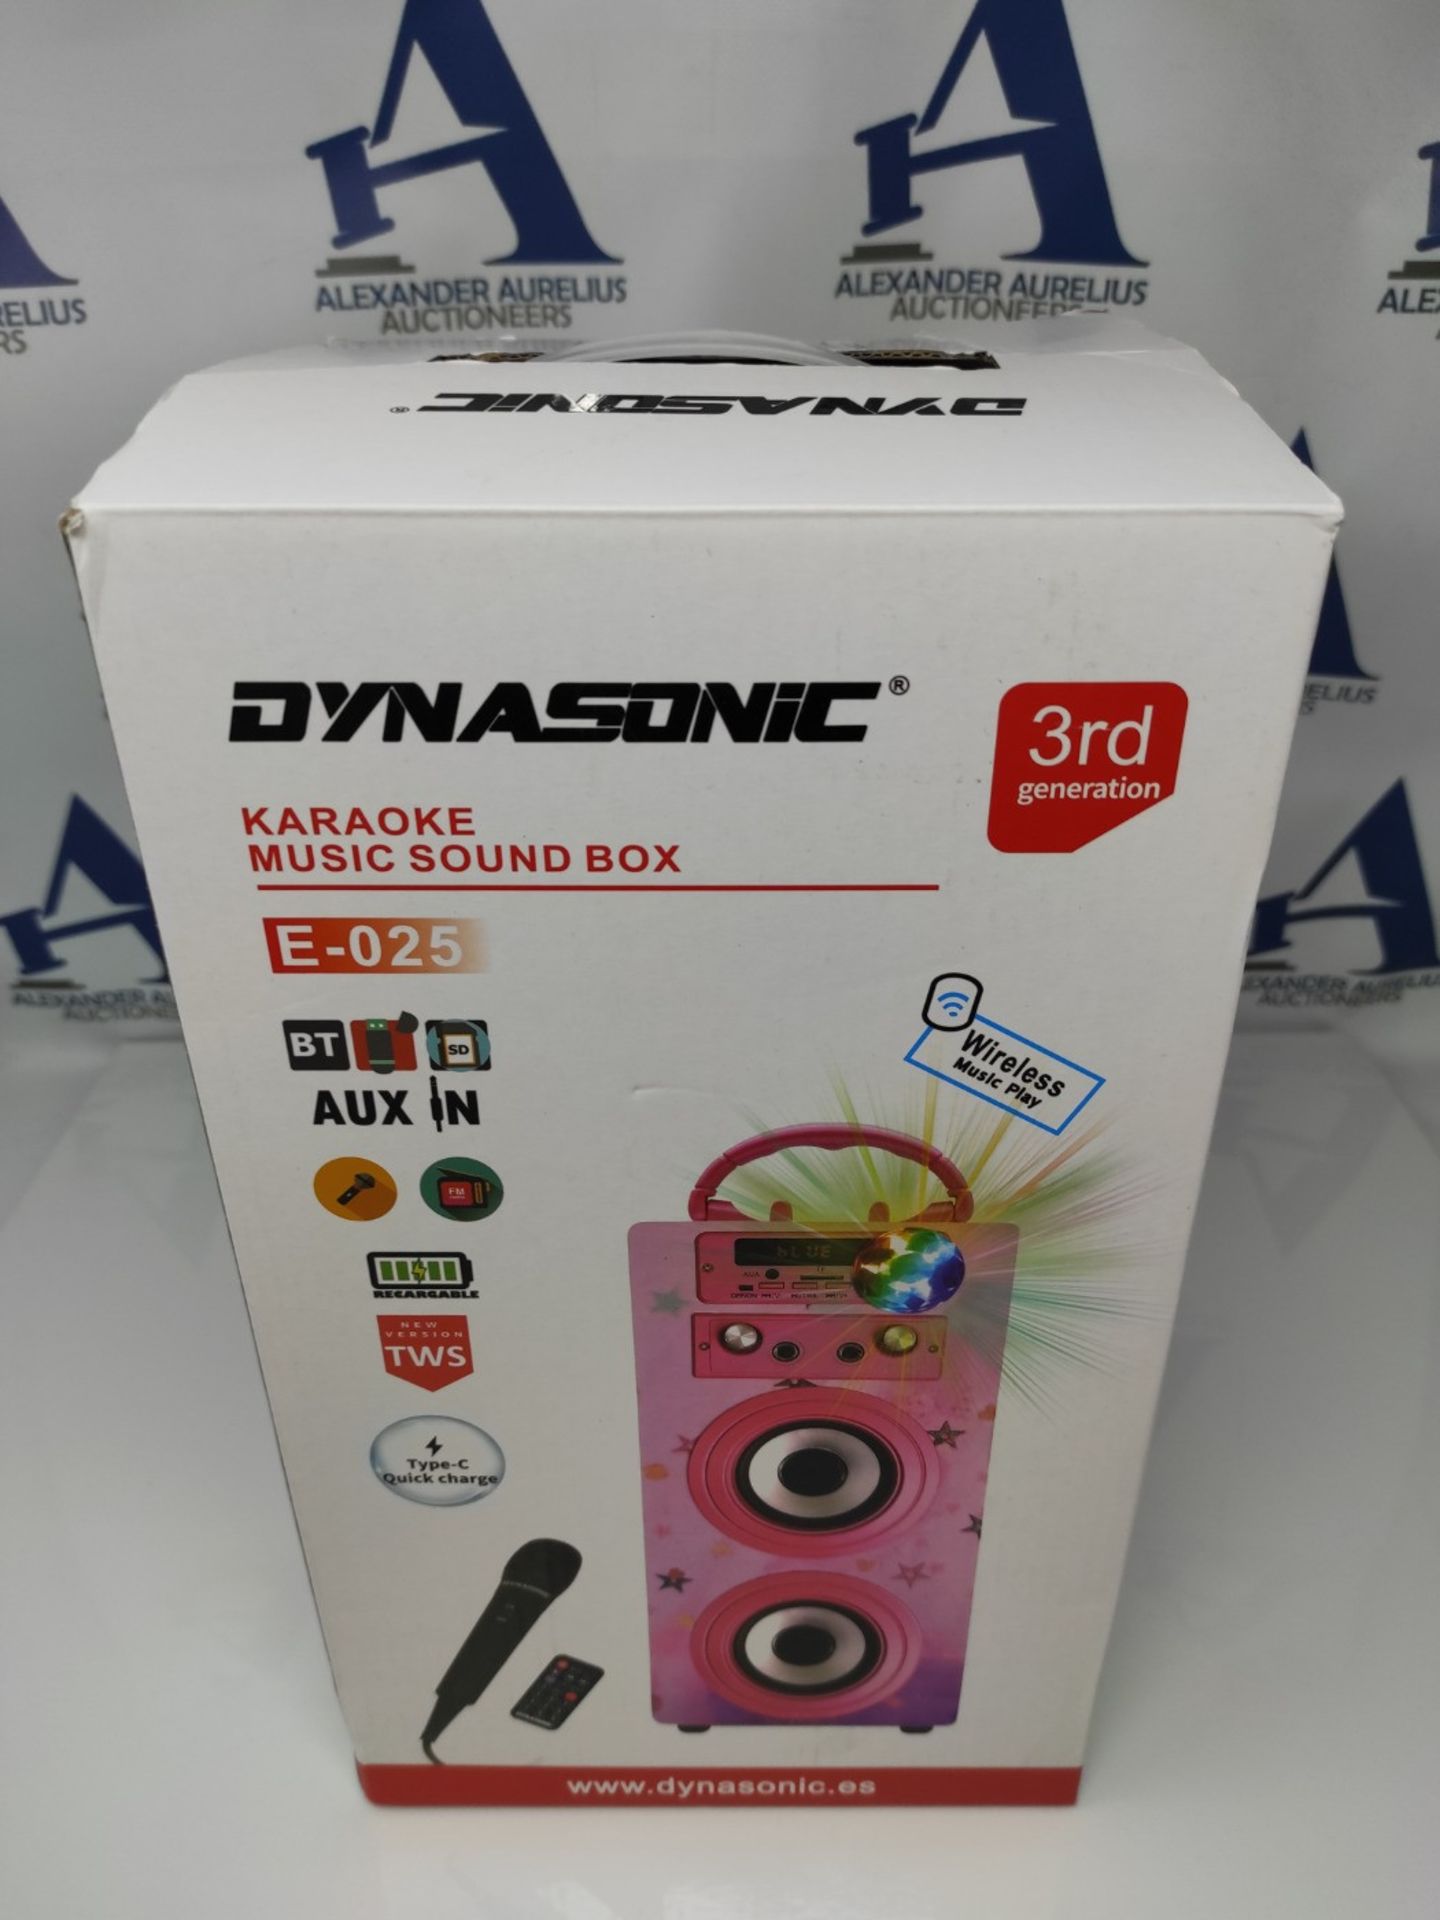 DYNASONIC 3rd generation Karaoke model with Microphone, Original Gifts for Children, T - Image 2 of 3